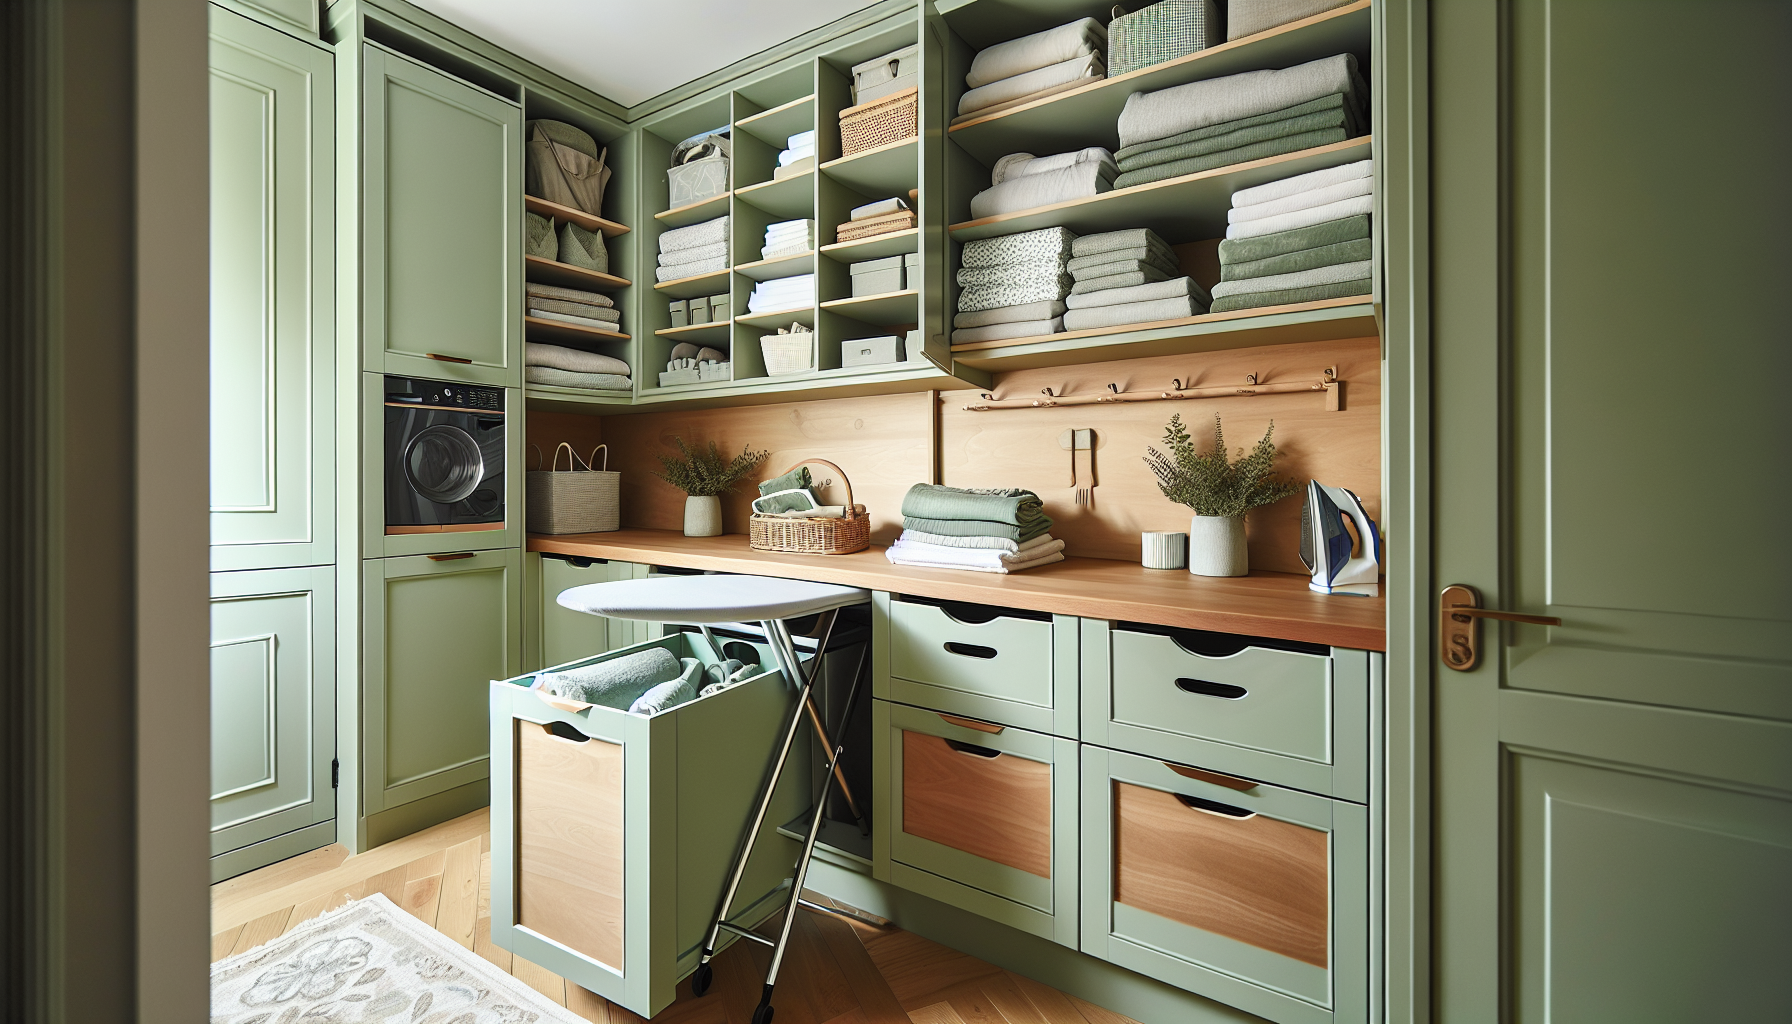 Customized laundry room cabinetry with built-in hampers